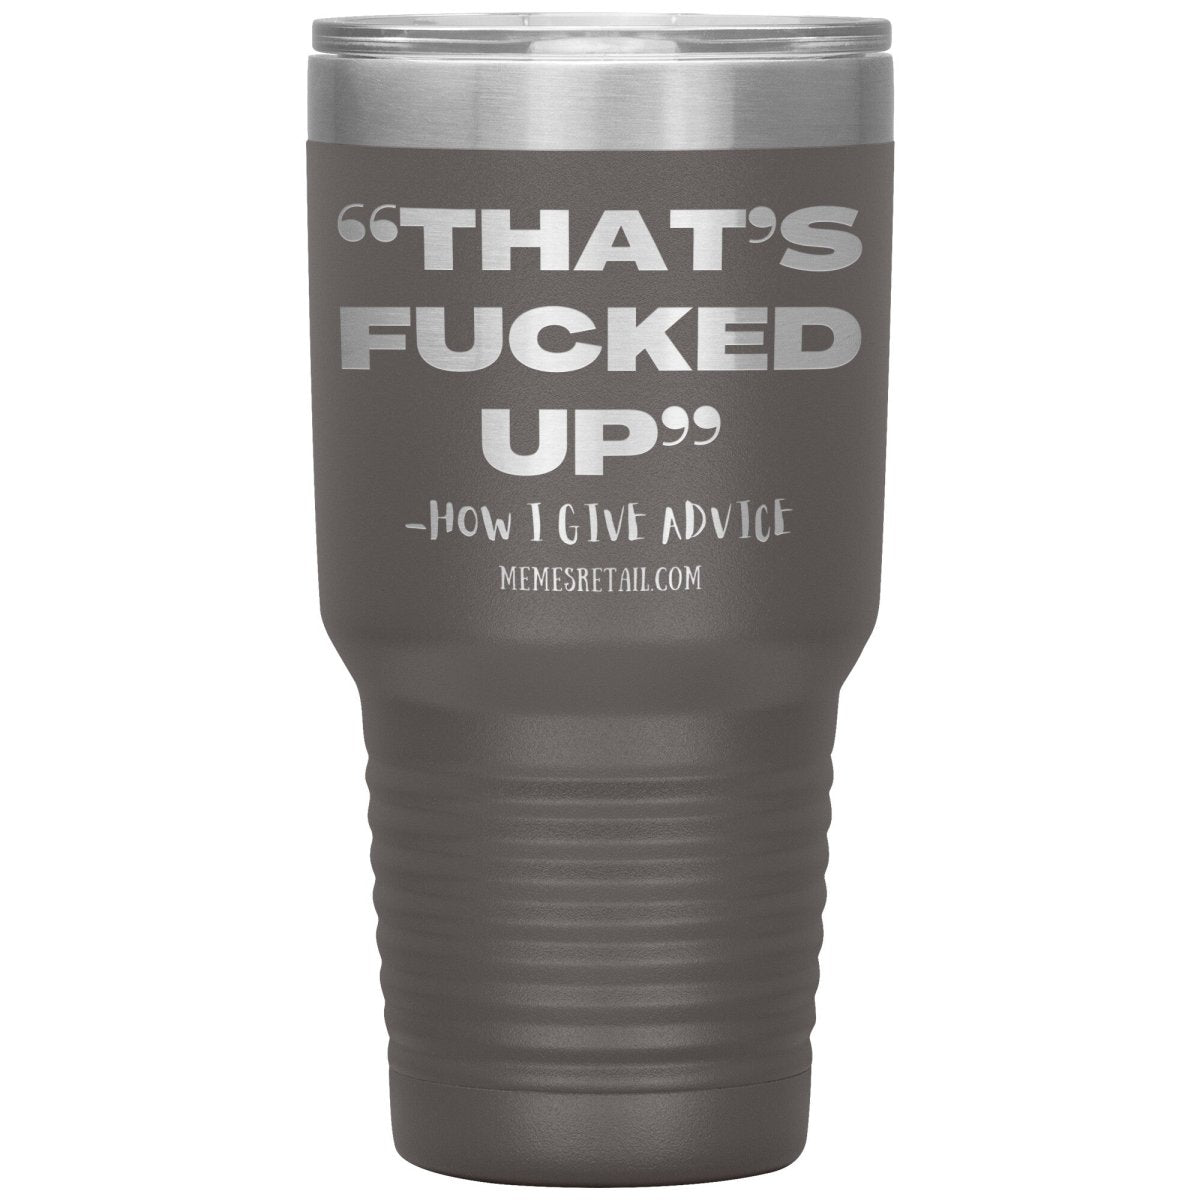 “That’s Fucked Up” -how I give advice Tumblers, 30oz Insulated Tumbler / Pewter - MemesRetail.com